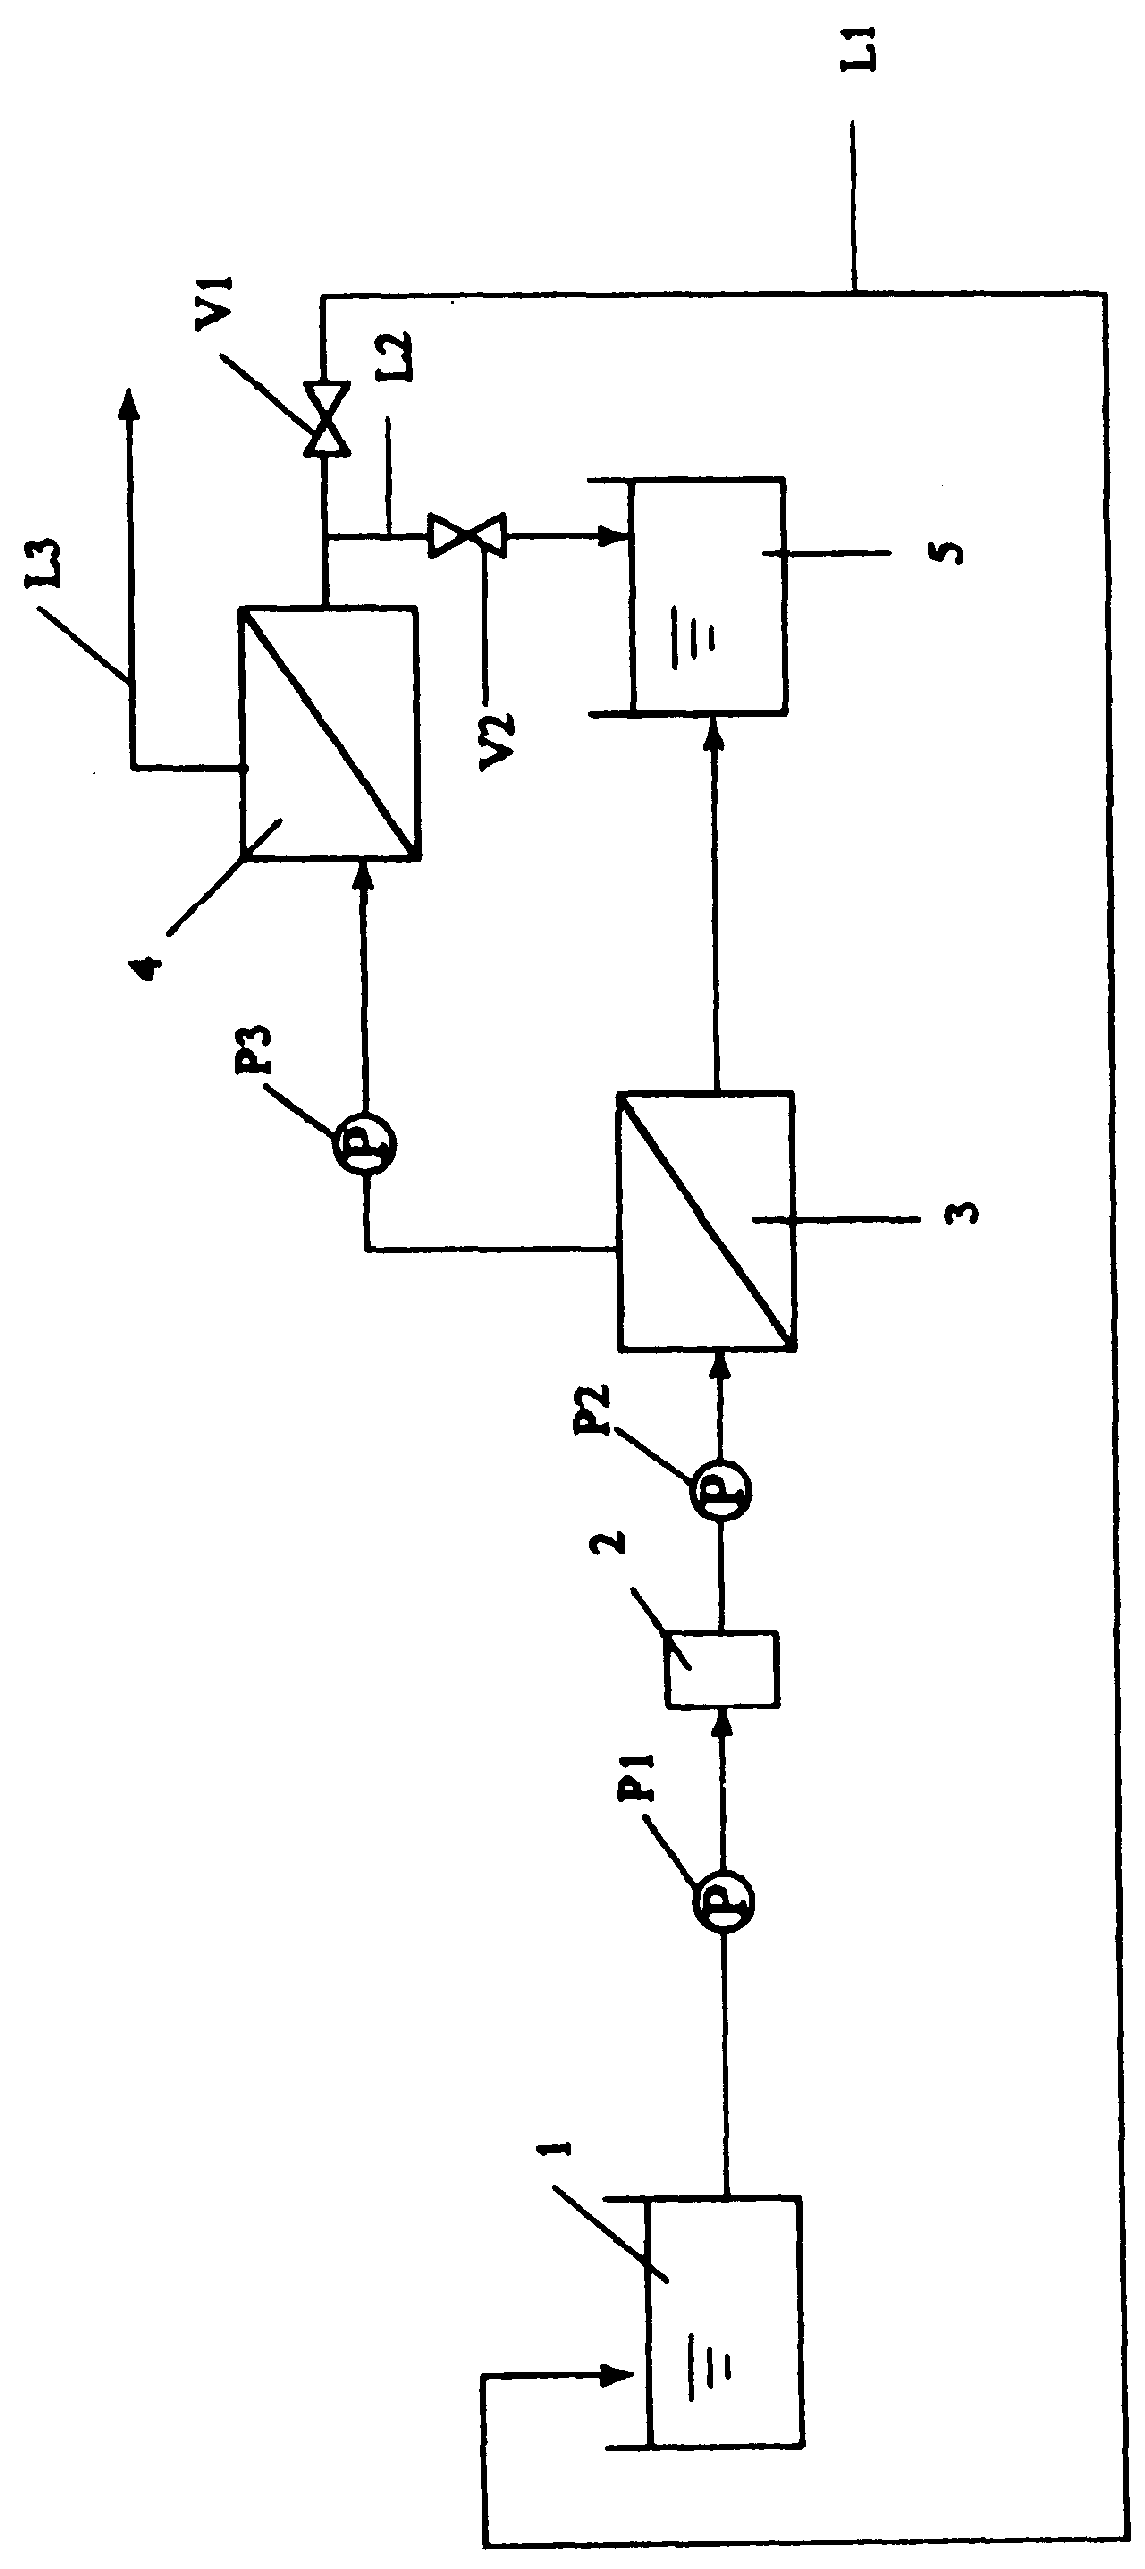 Process and equipment for rejuvenation treatment of photoresist development waste